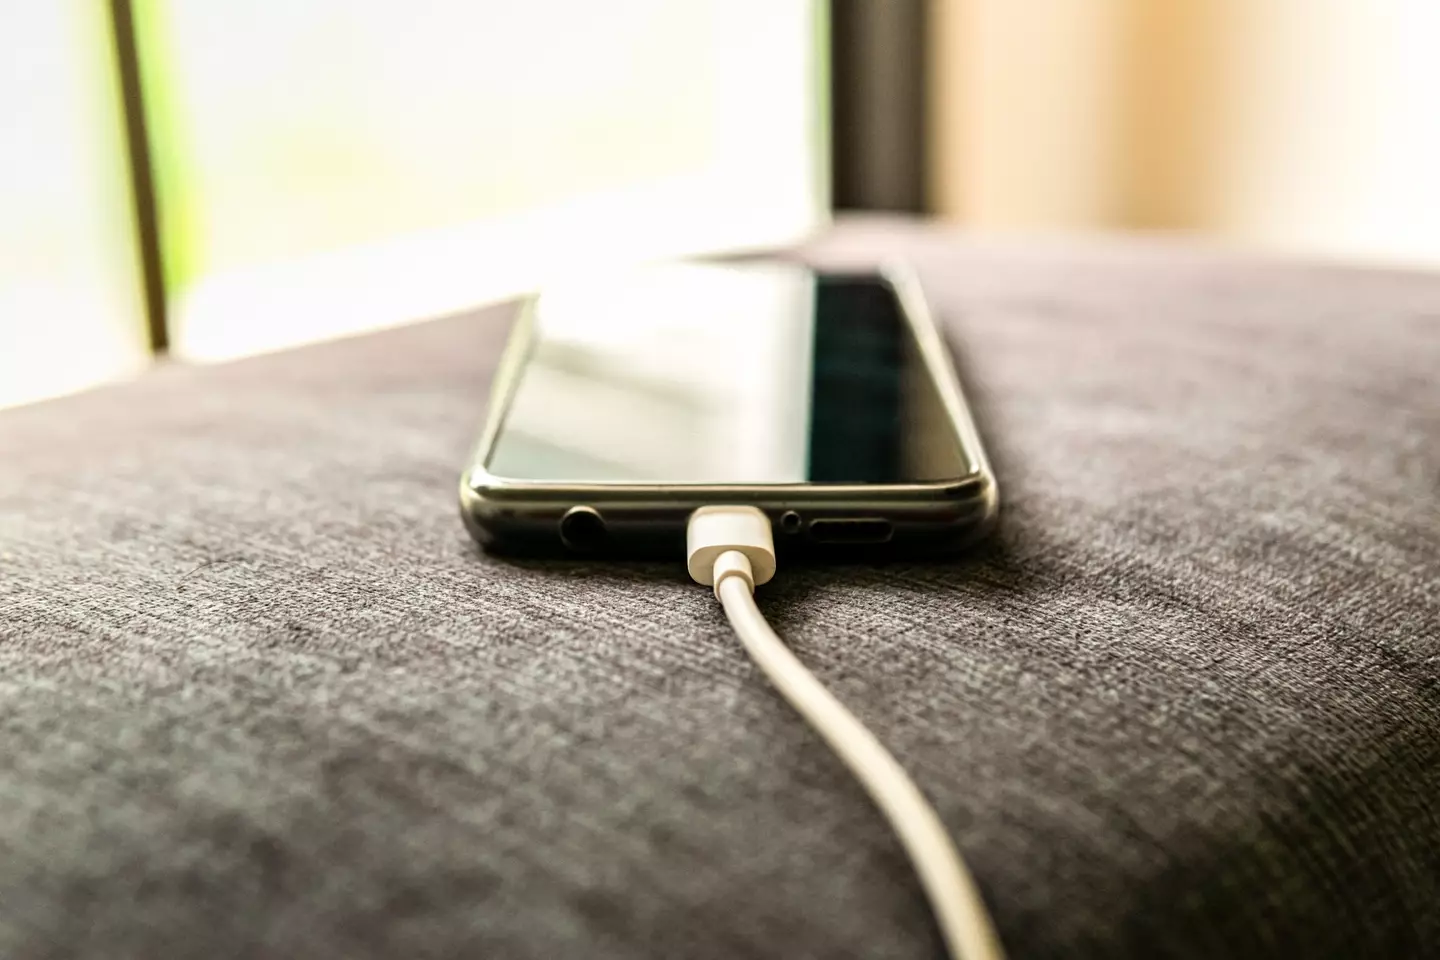 You might want to avoid charging your phone overnight.